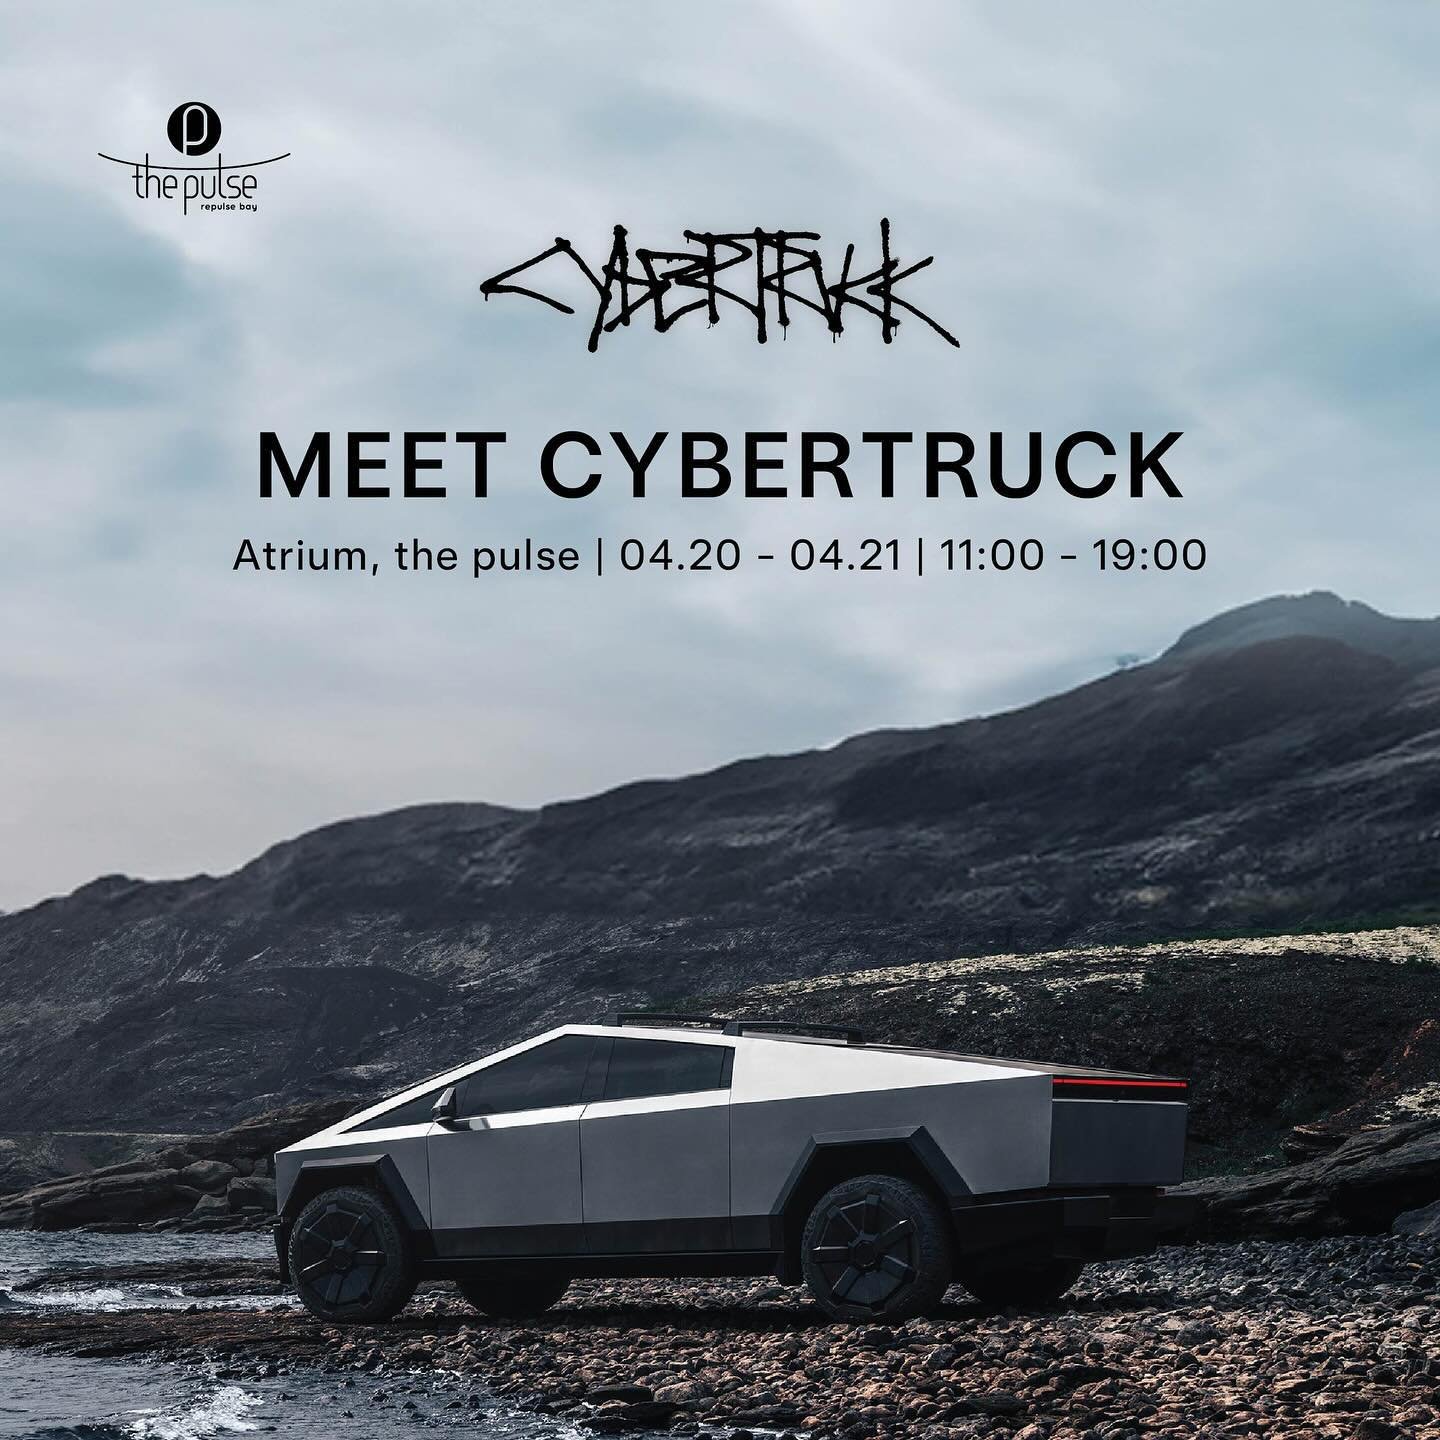 [Back to the Future-vibe! Find your beat again with the flash appearance of Tesla Cybertruck]

The built-for-any-planet Cybertruck is now showcased in the Atrium at the pulse this weekend. With the futuristic design, it combines the utility of a truc